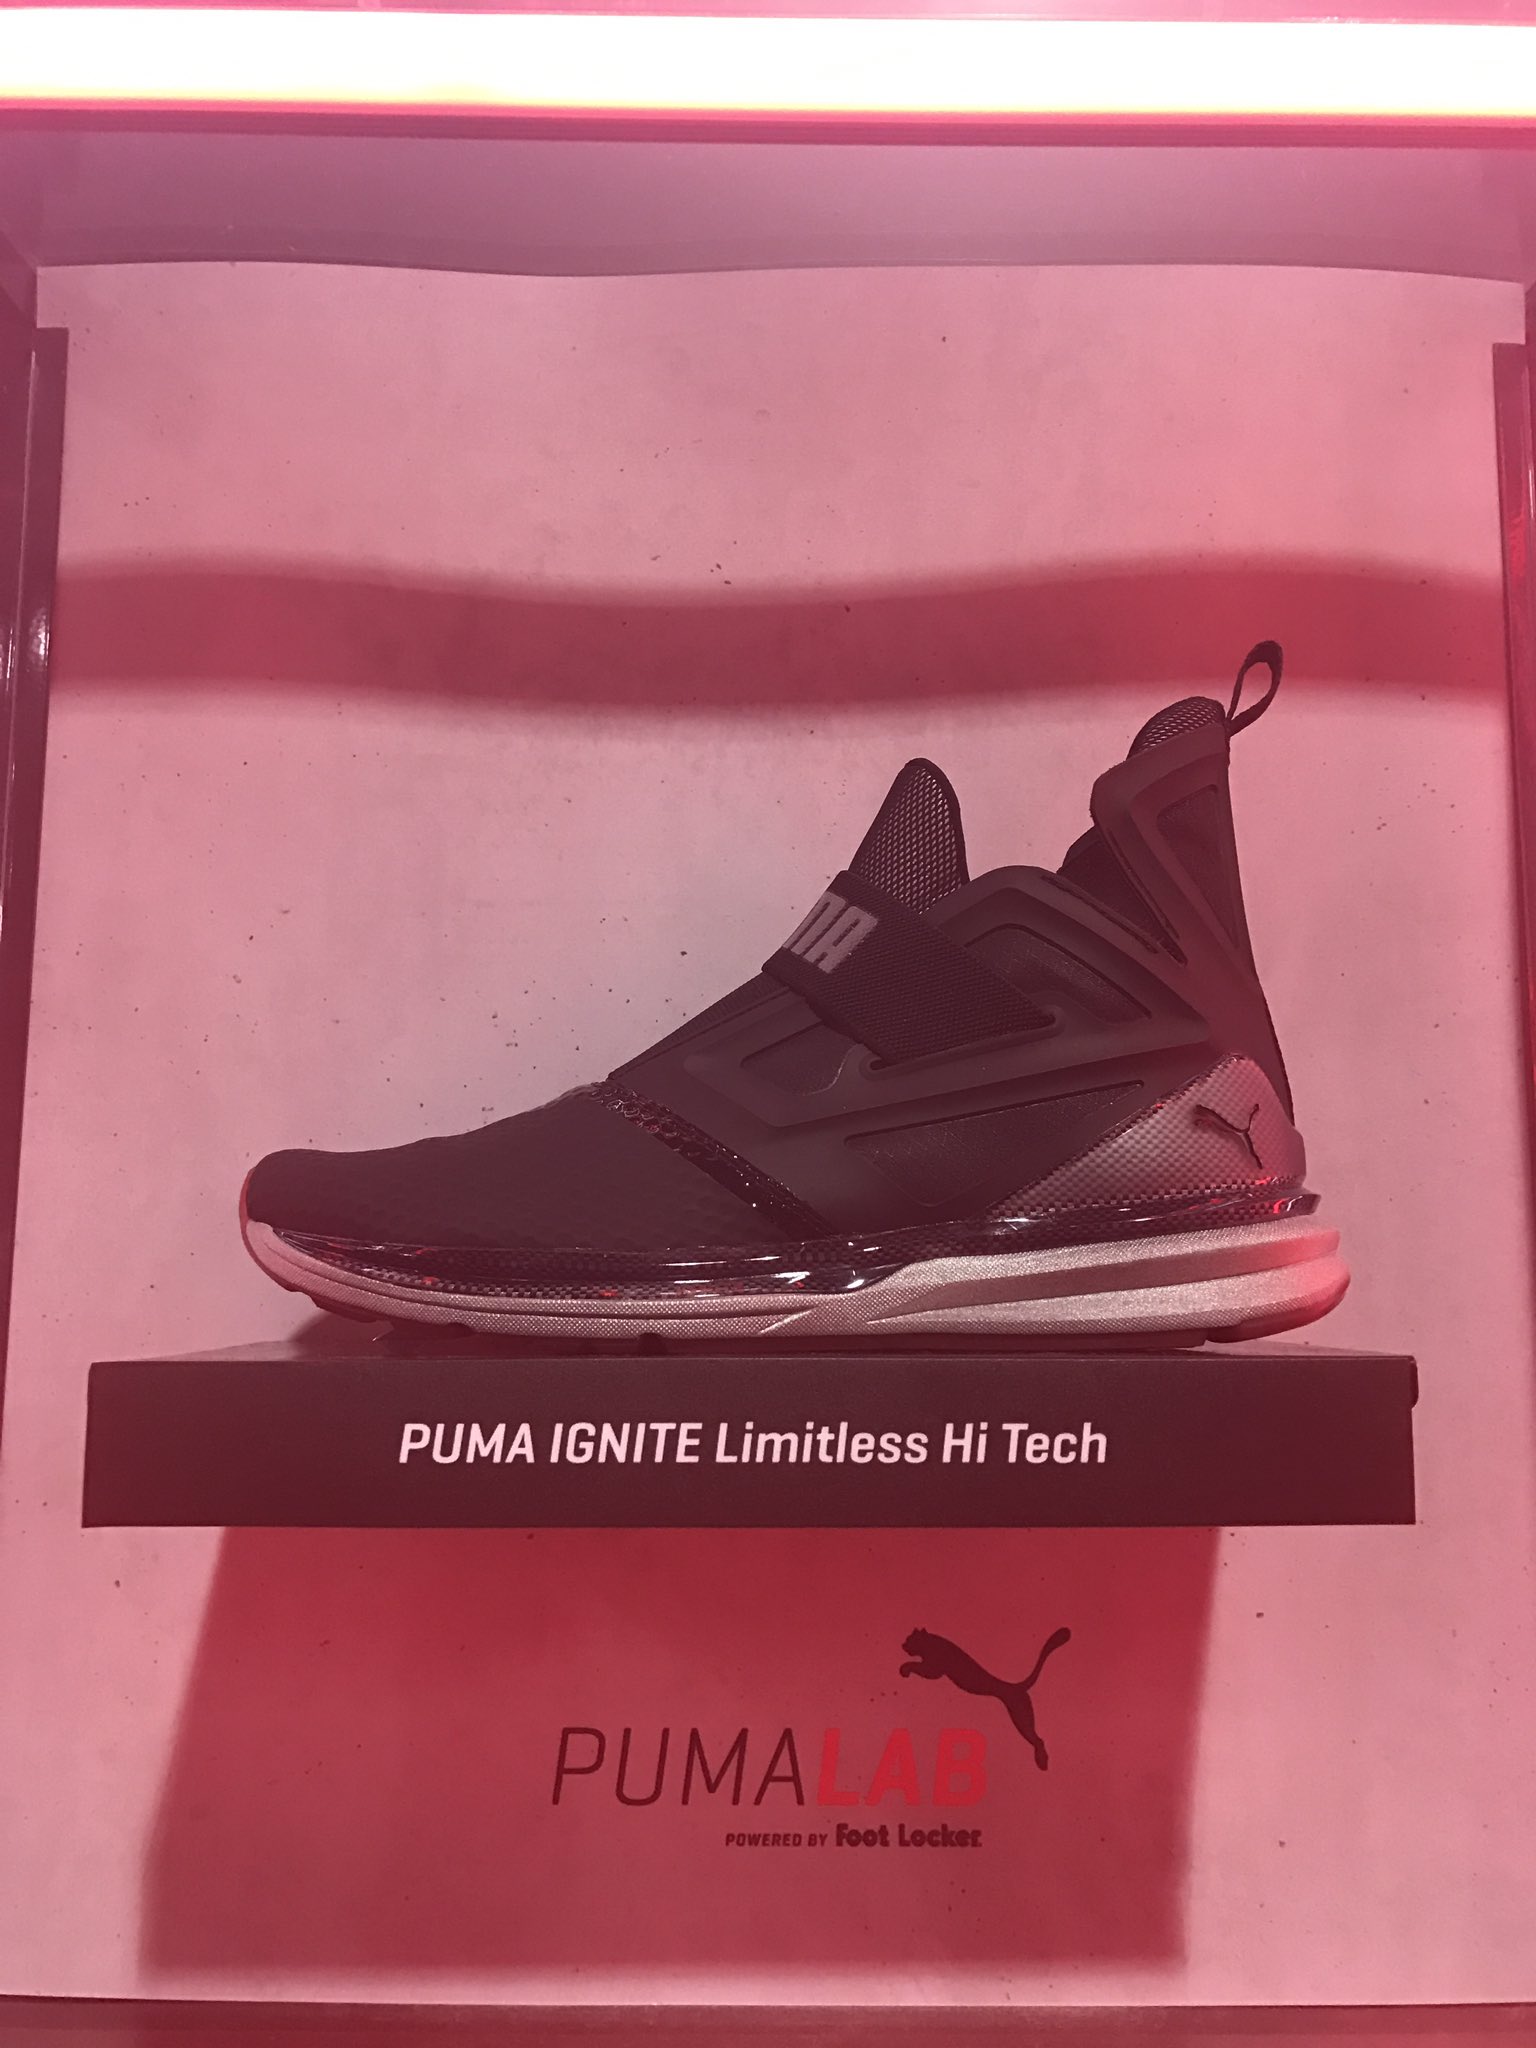 Complex Sneakers on Twitter: "The @PUMA IGNITE Limitless Hi Tech is available at #PumaLab to 15 pairs. #ComplexCon https://t.co/oUdGtCSOKV" / Twitter